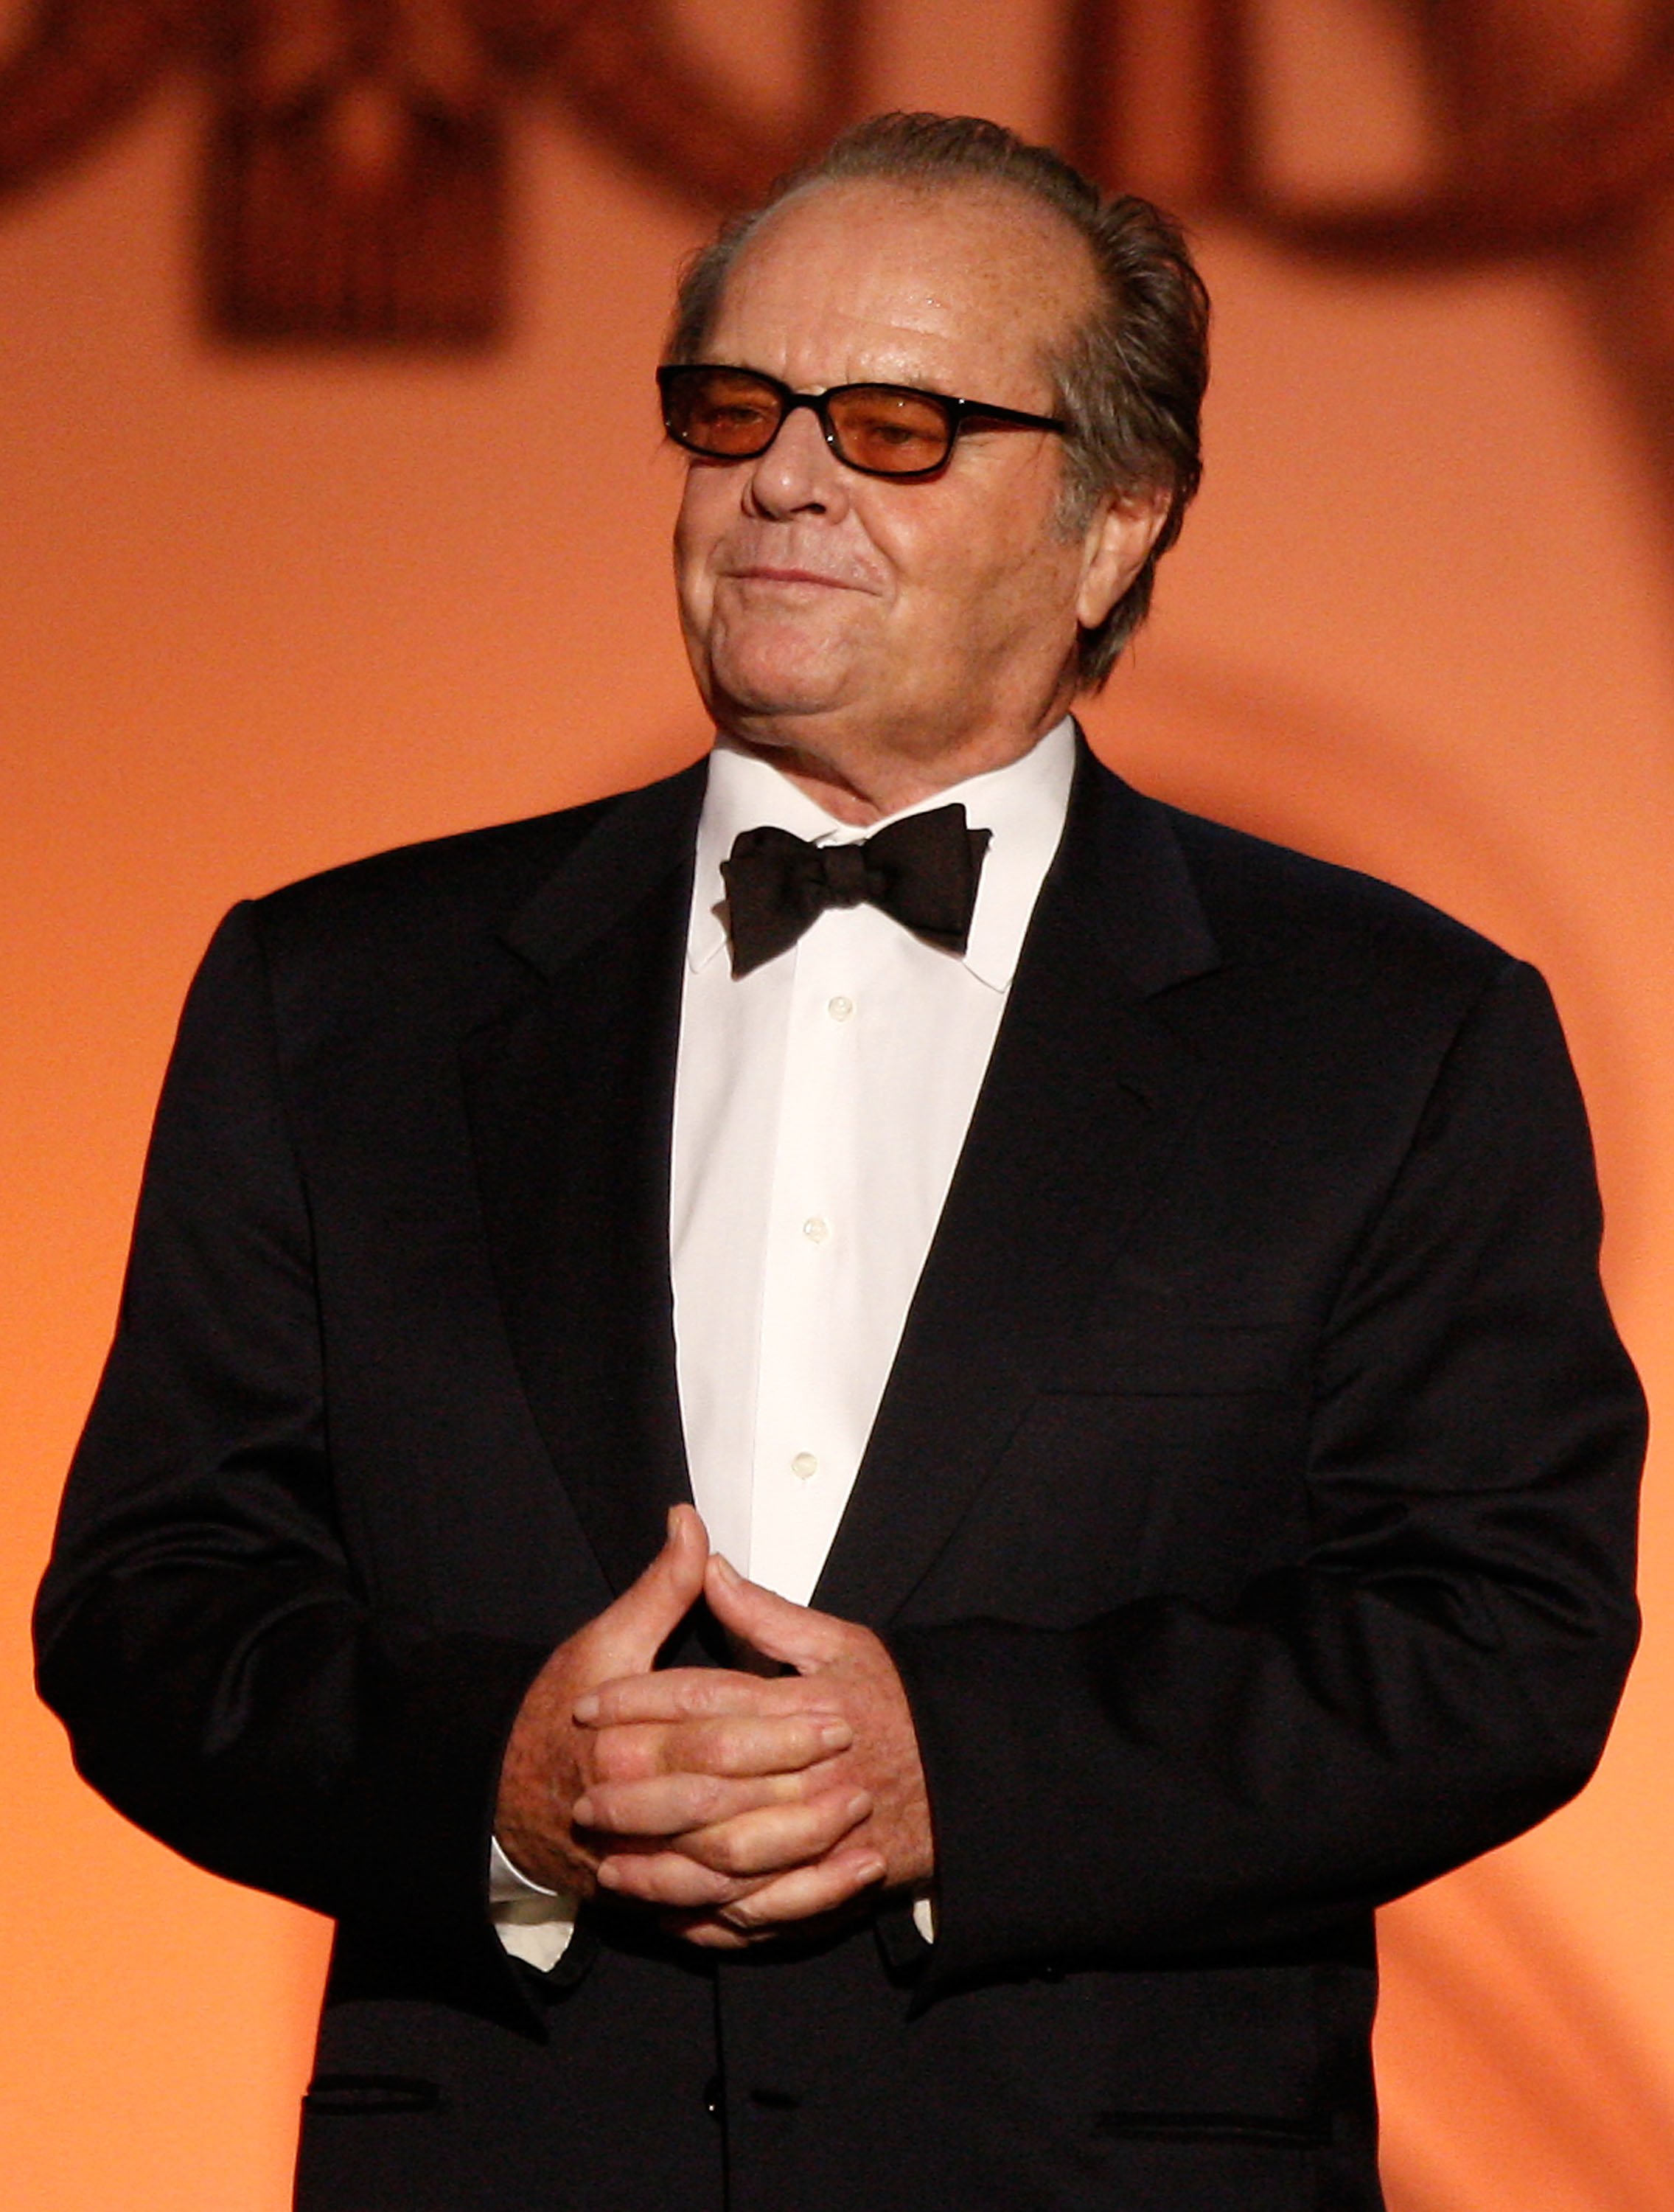 Jack Nicholson speaks onstage during the AFI Life Achievement Award: A Tribute to Michael Douglas at Sony Pictures Studios on June 11, 2009, in Culver City, California. | Source: Getty Images.